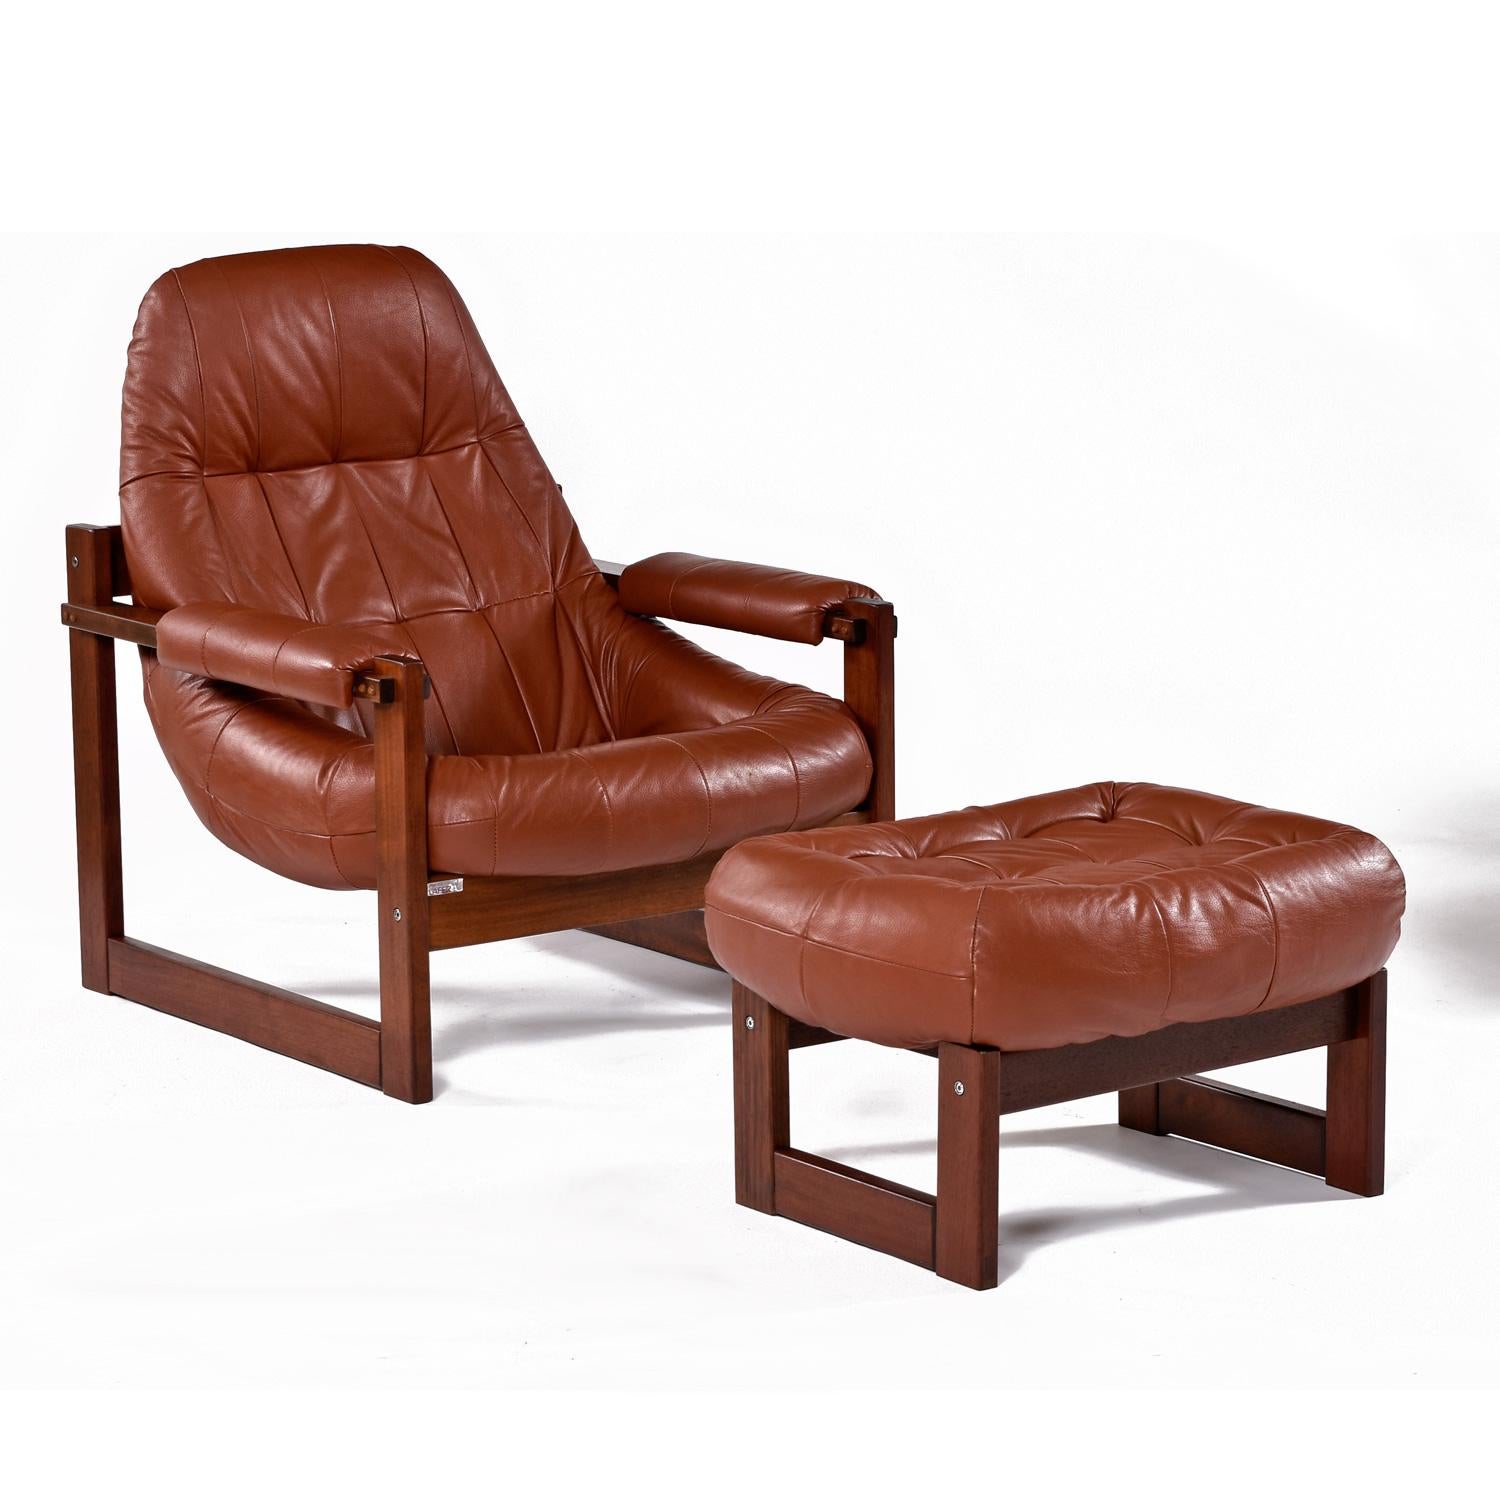 Percival Lafer Cognac Leather & Rosewood MP-163 